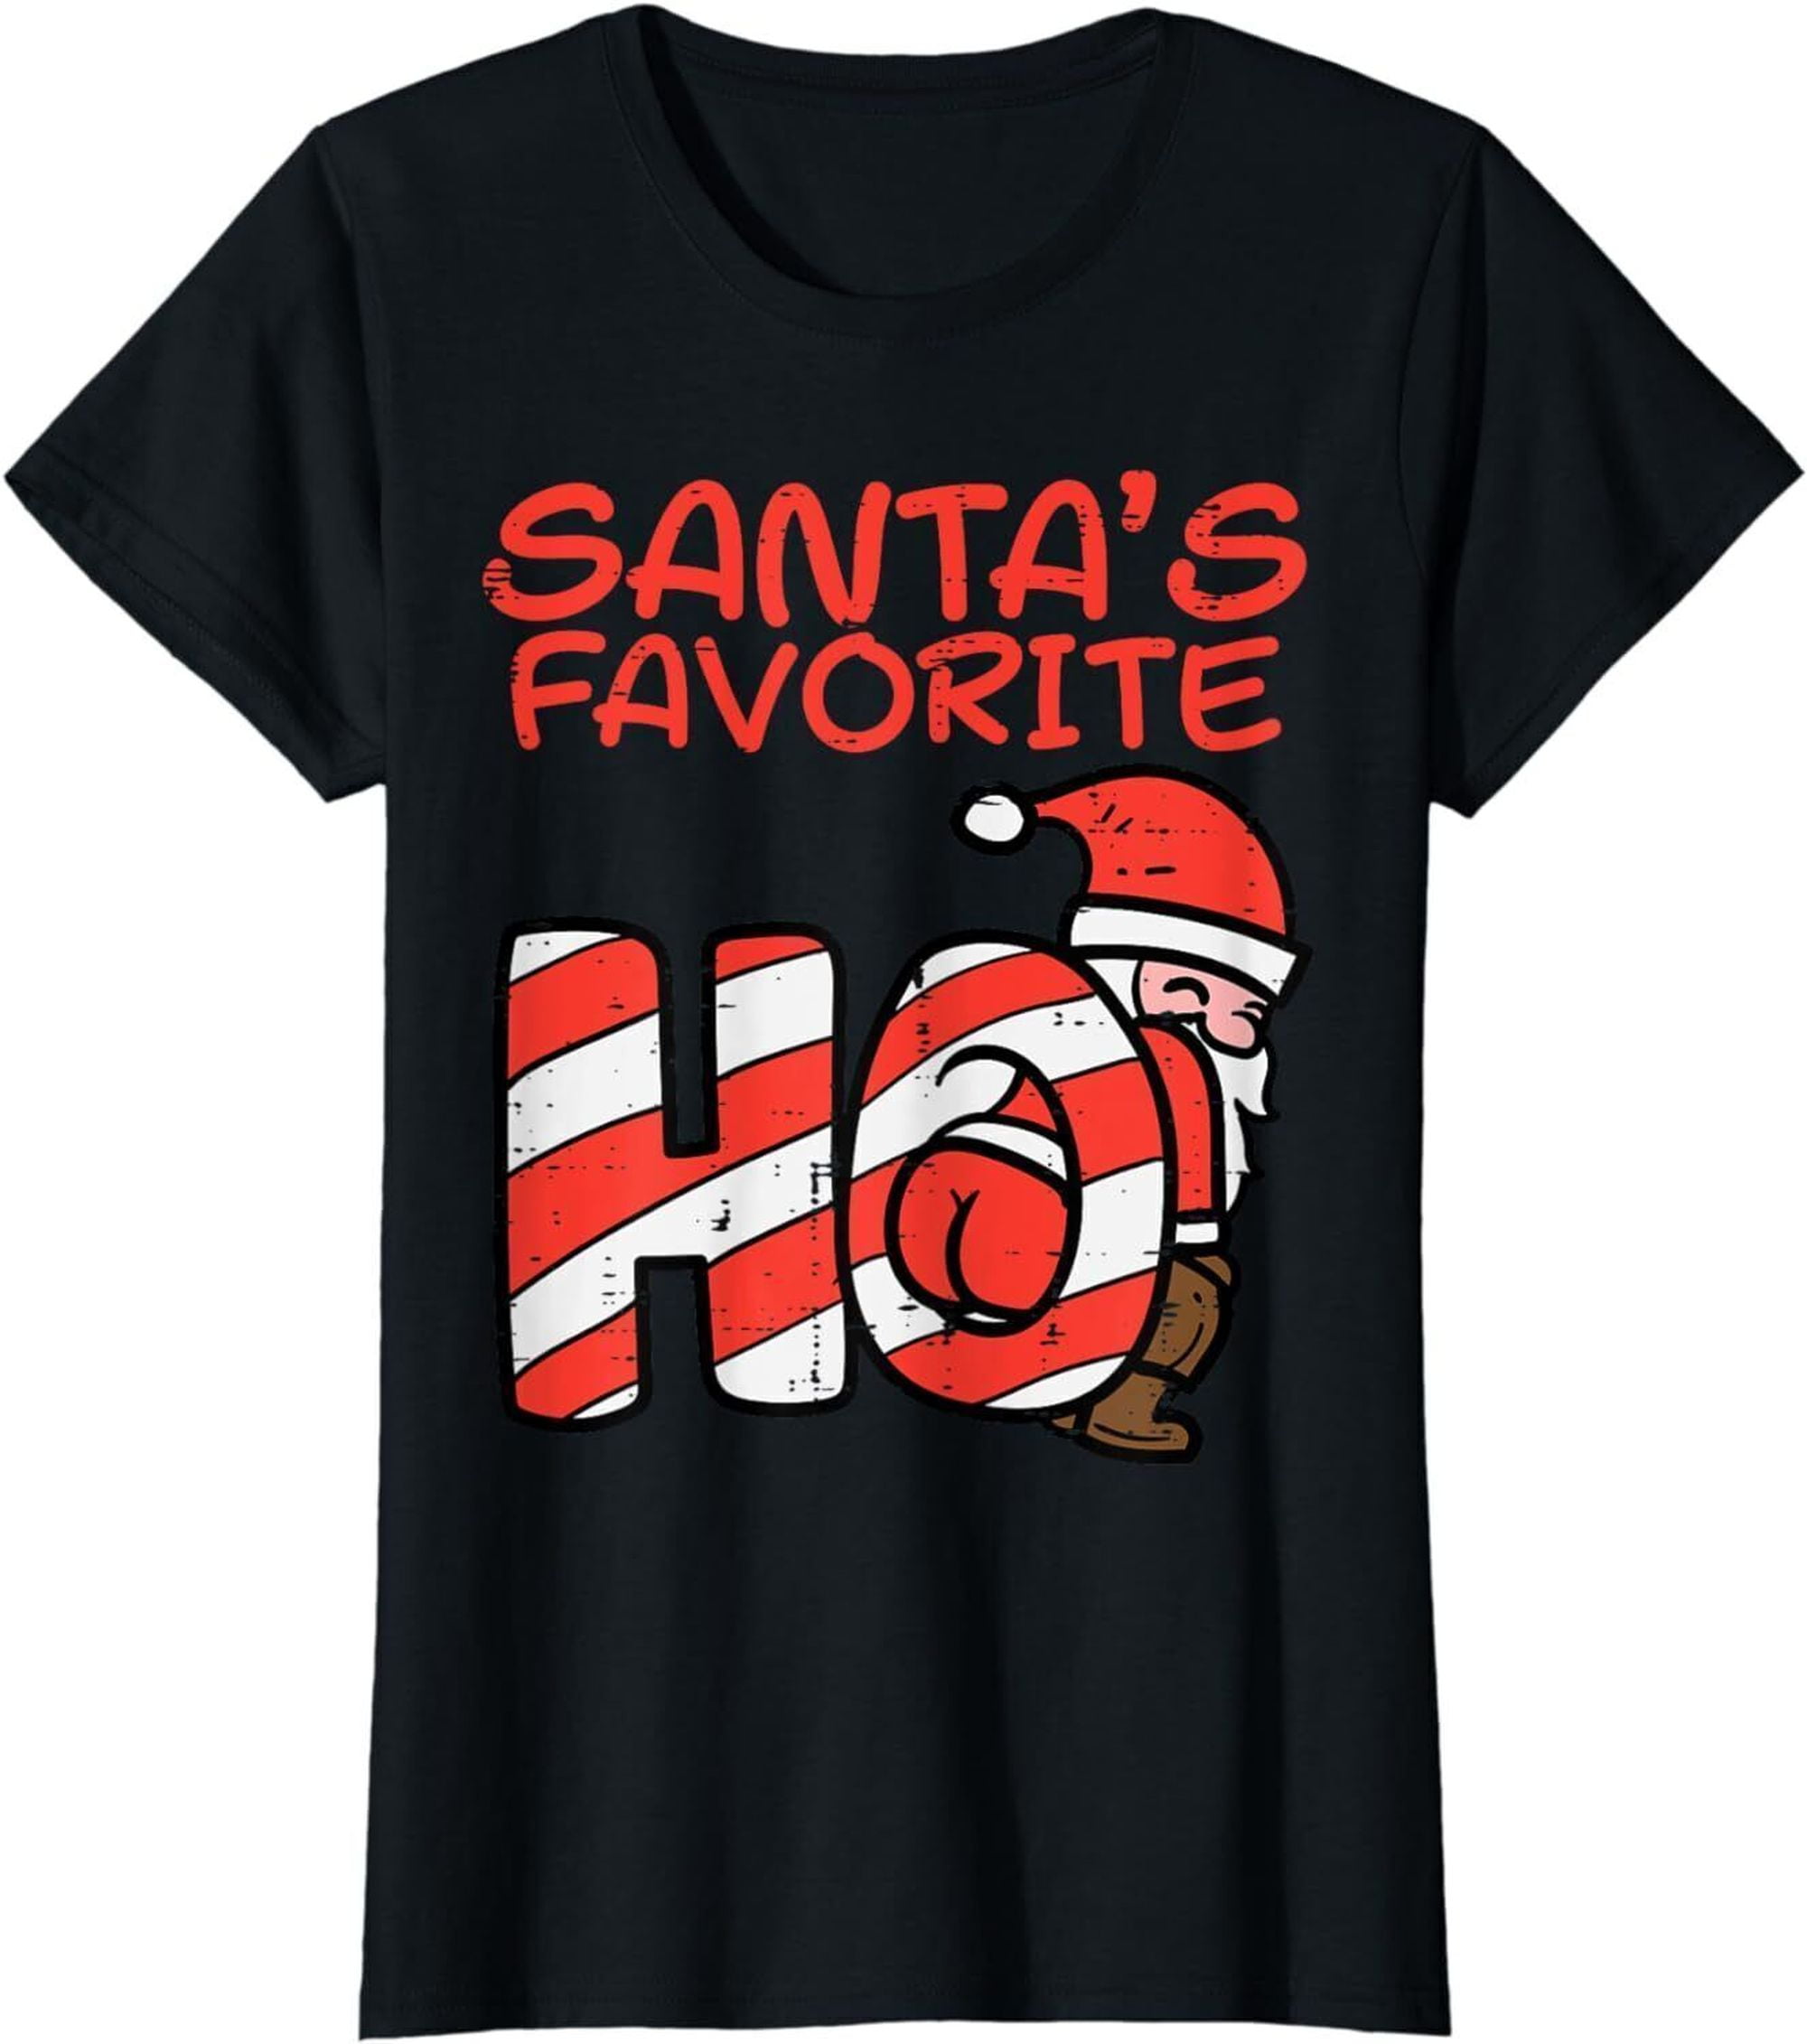 Festive Holiday Shirt: Embrace Your Inner Santa with this Playful Adult ...